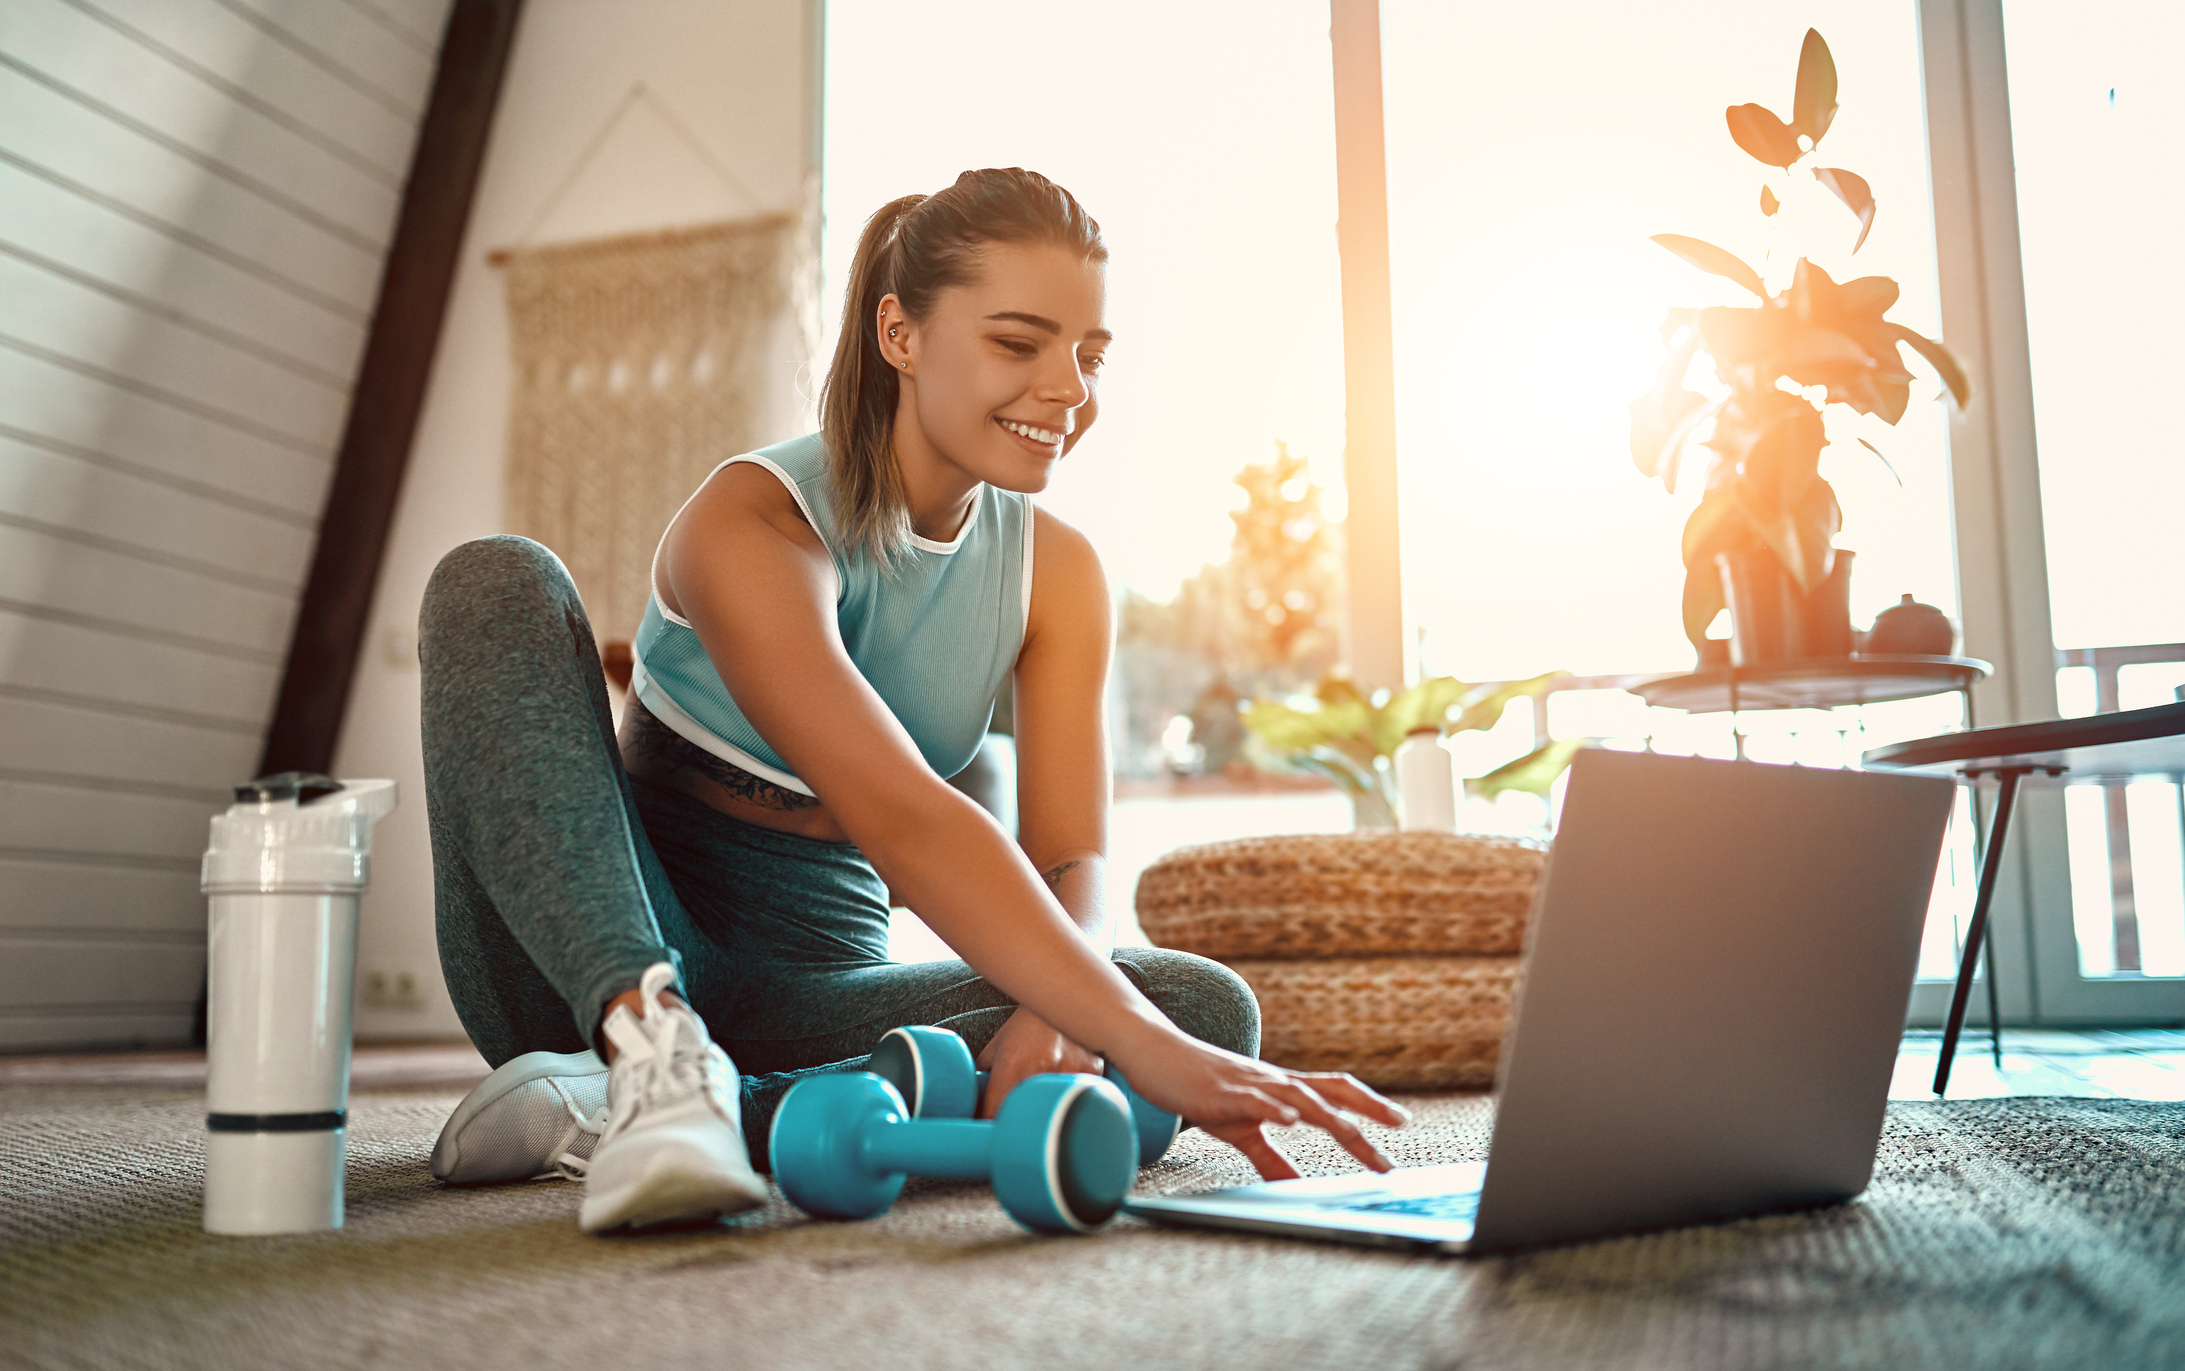 Woman in workout clothes using a computer; the online fitness business model